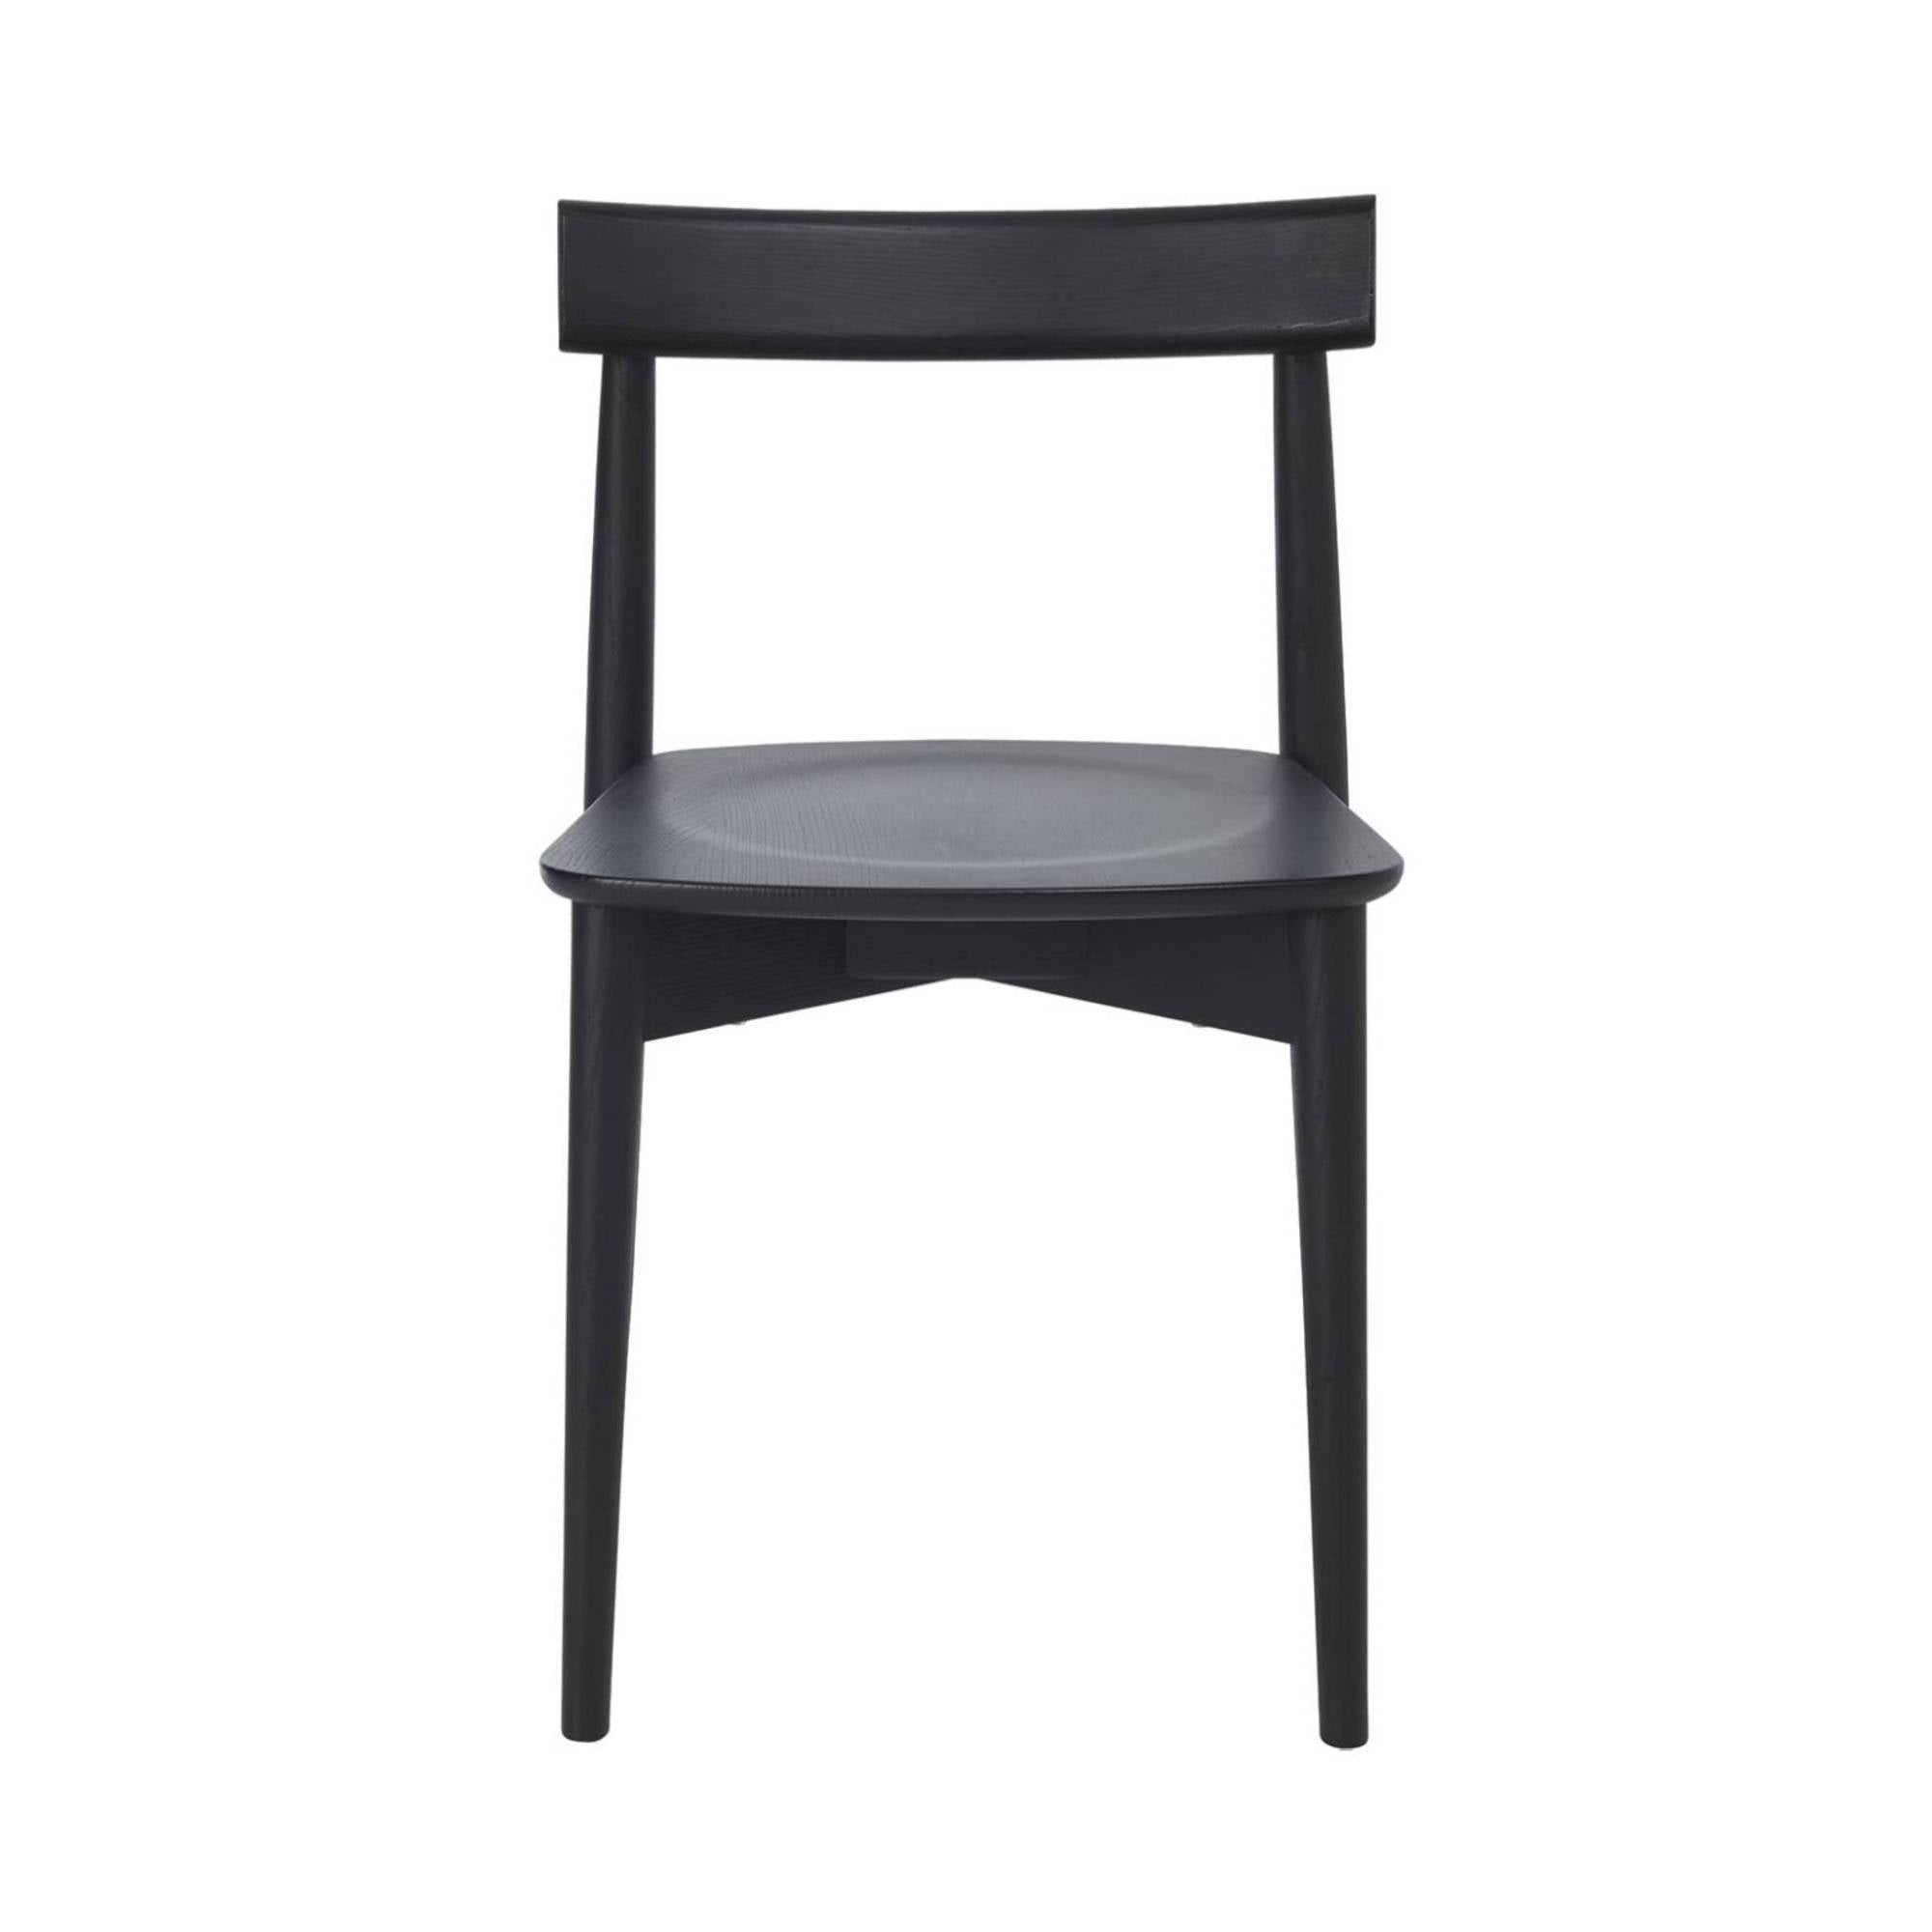 Lara Chair: Stacking + Stained Black